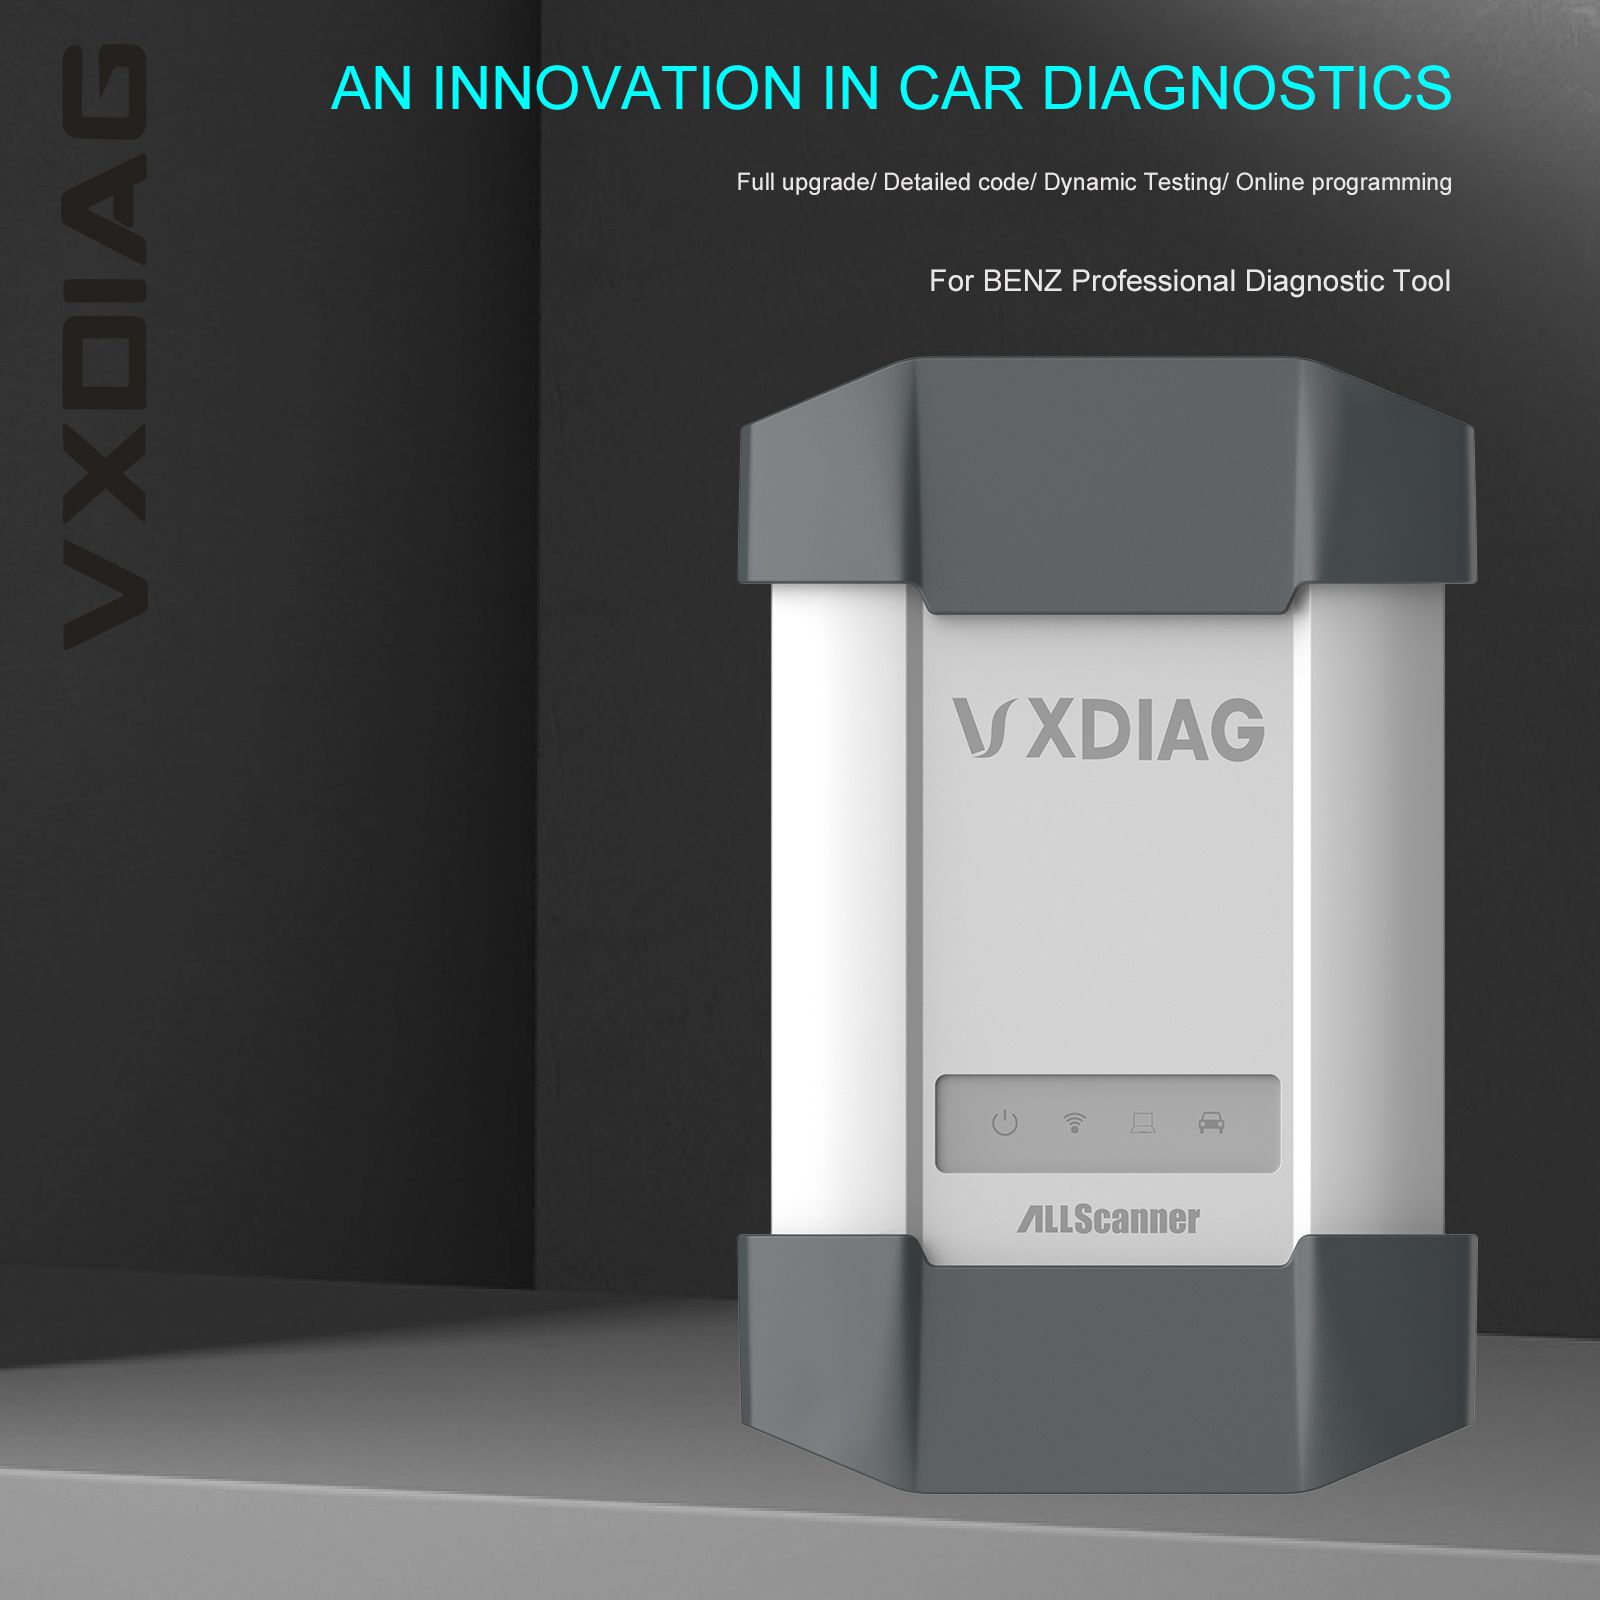 VXDIAG Benz C6 Star VXDIAG Multi Diagnostic Tool for Mercedes Without HDD